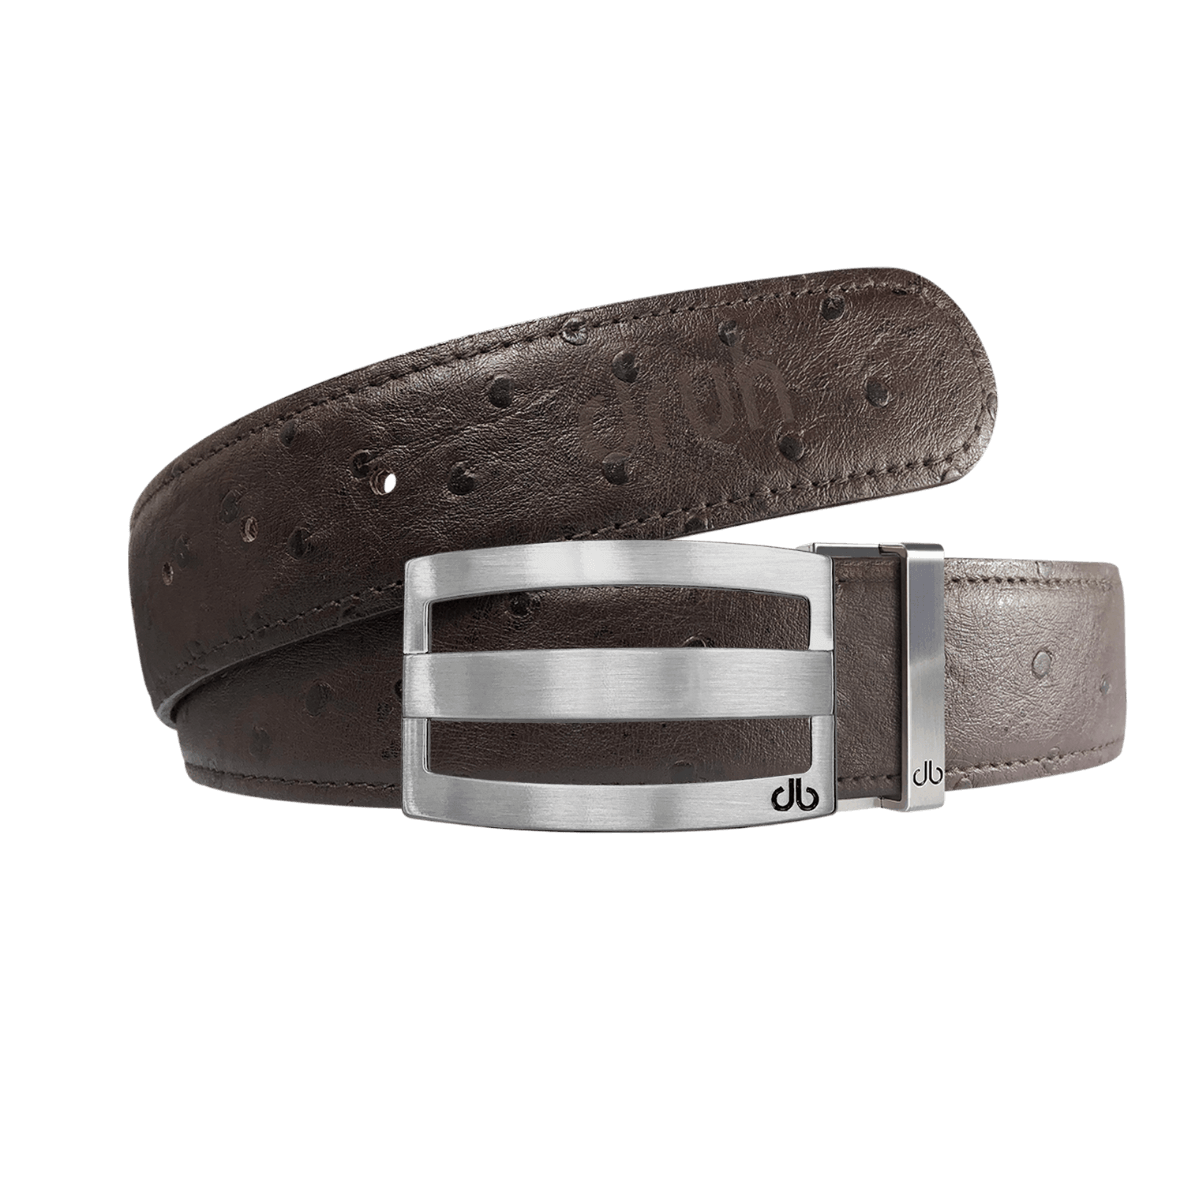 Brown Ostrich leather strap with Classic stripe buckle